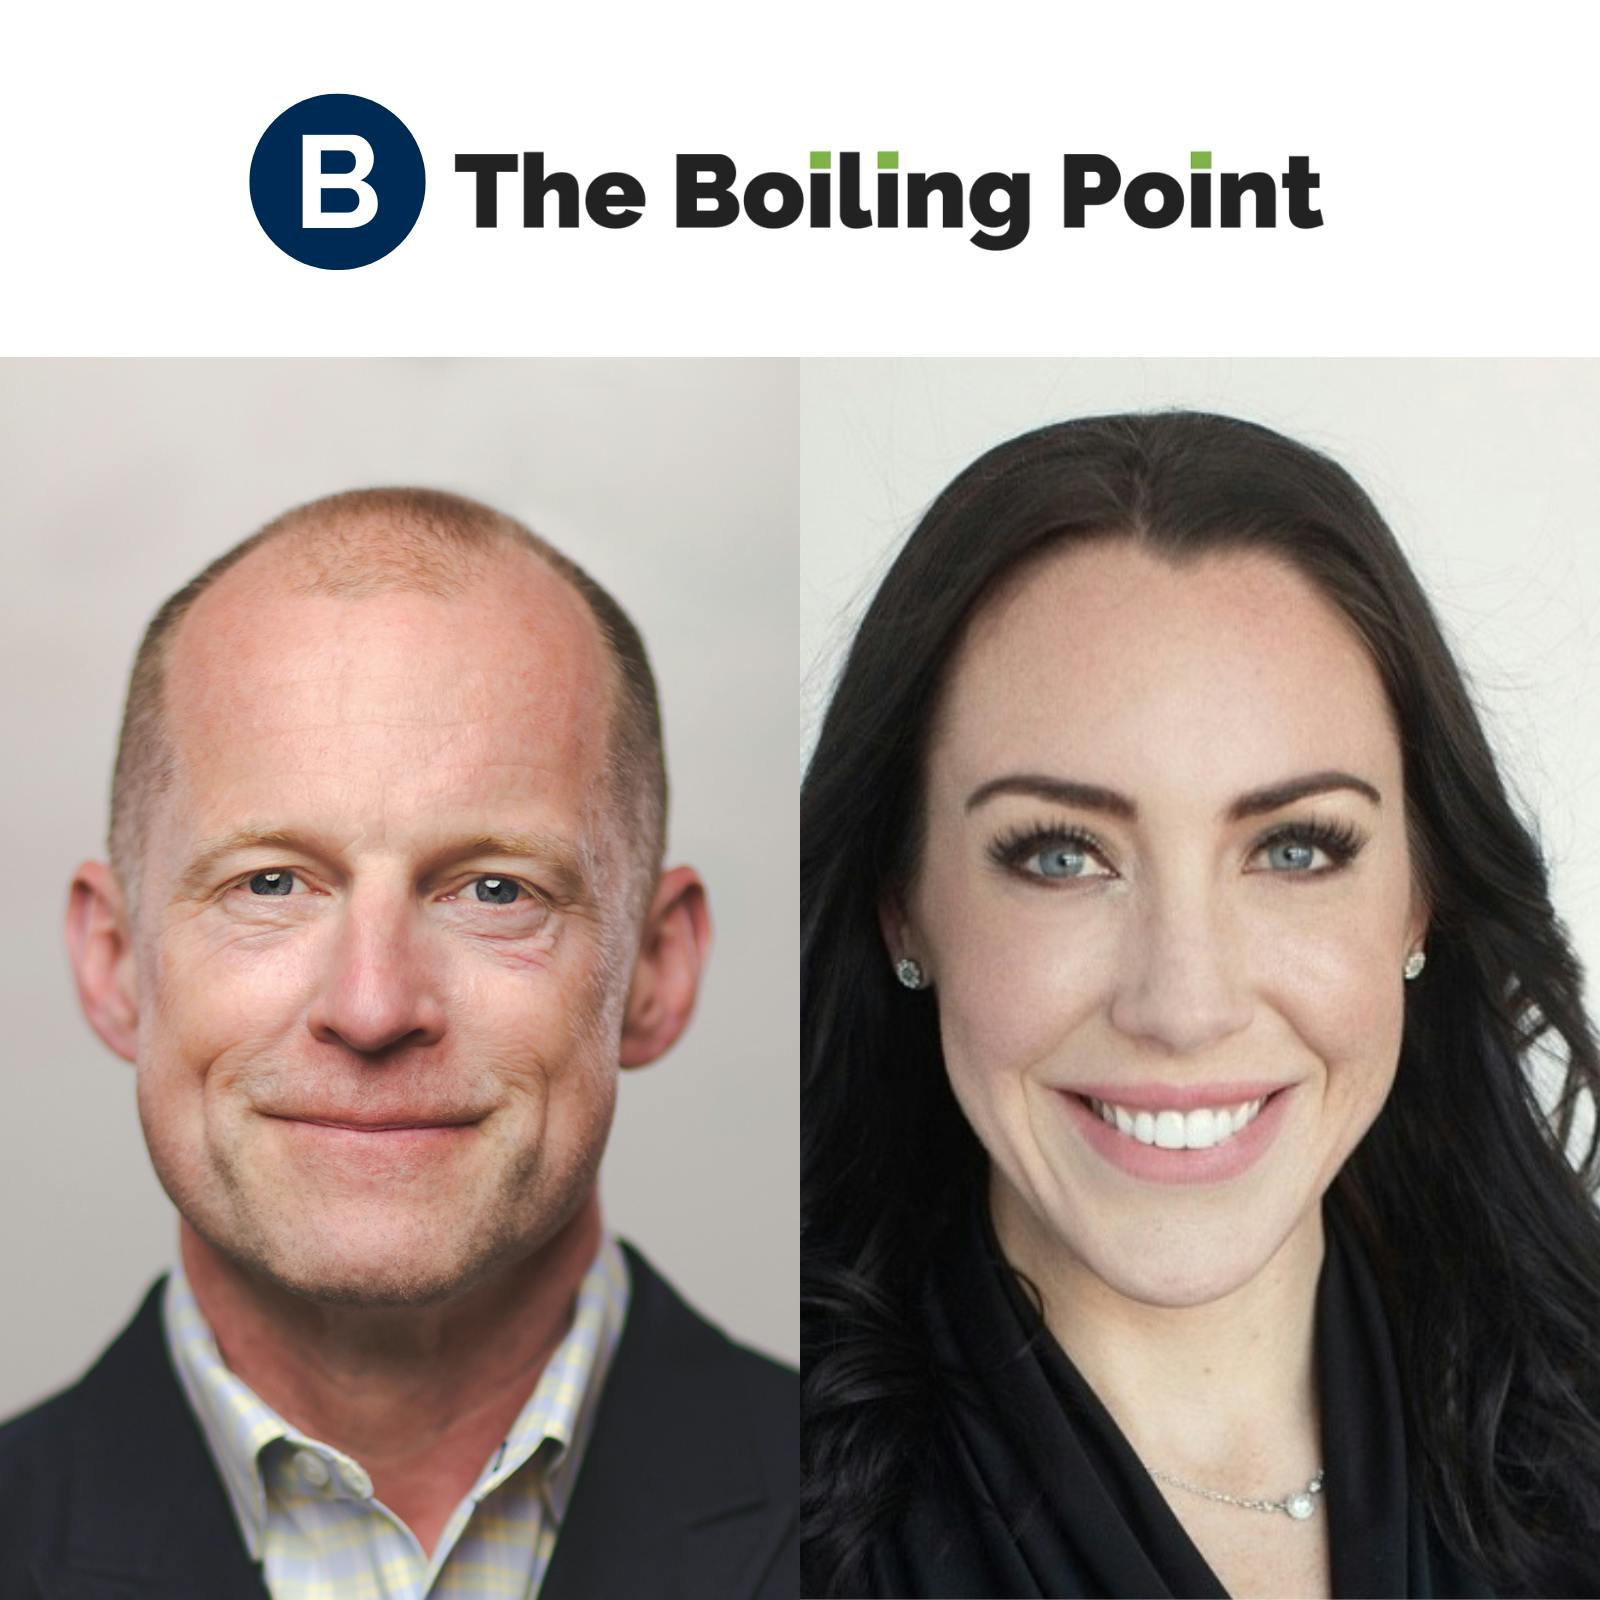 The Boiling Point - Episode 172 Walter Escobar